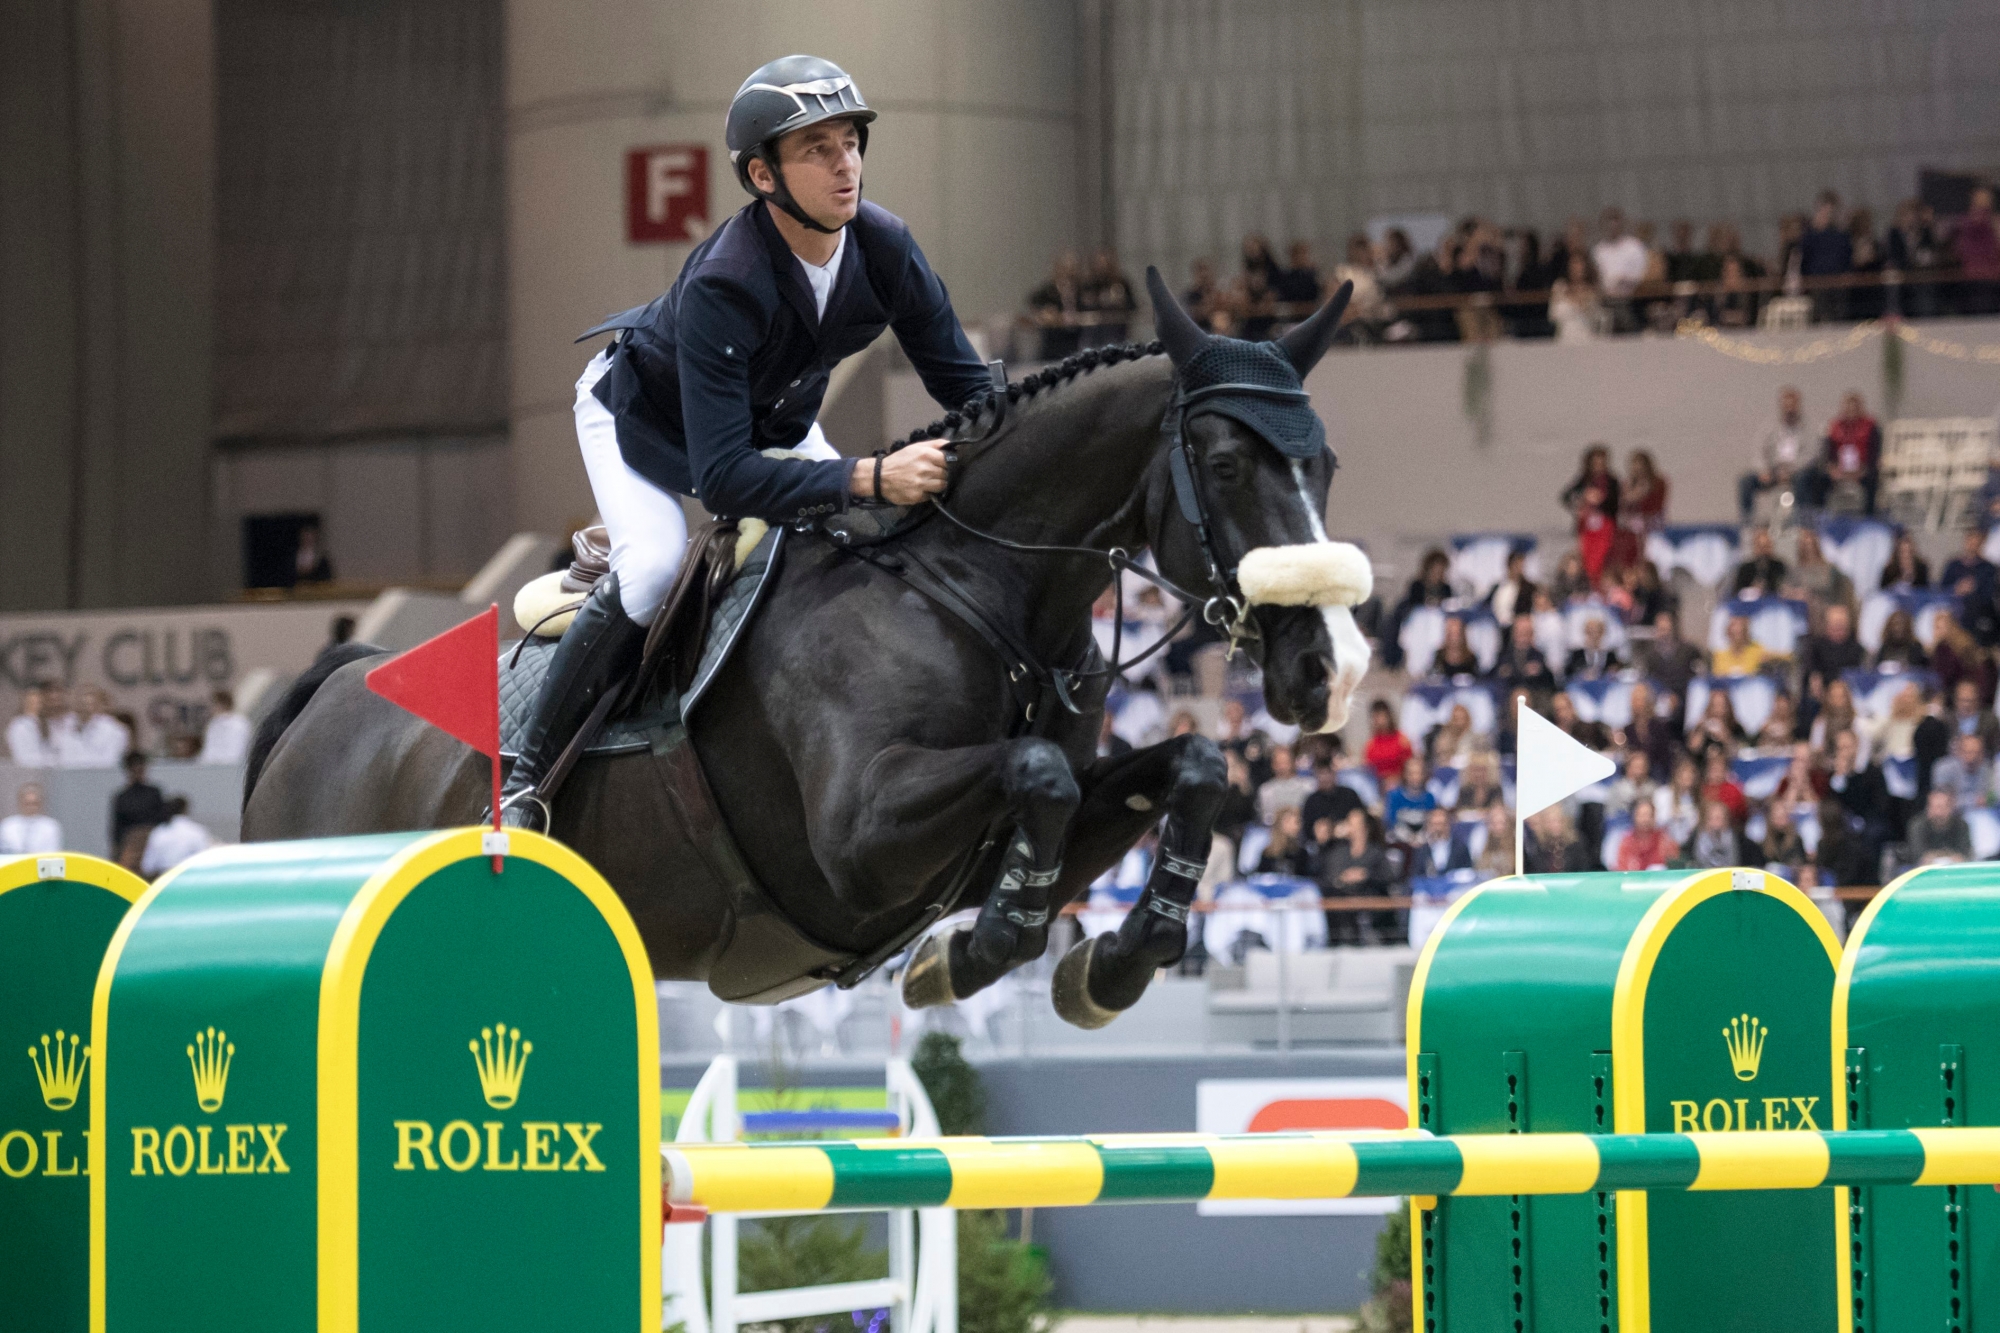 Steve Guerdat from Switzerland rides his horse Alamo to take the 1th place during the 18th top 10 IJRC at the 58nd CSI horse Show-jumping tournament in Geneva, Switzerland, on Friday, December 7, 2018. (KEYSTONE/Adrien Perritaz) SWITZERLAND GENEVA CSI IJRC HORSE SHOW JUMPING